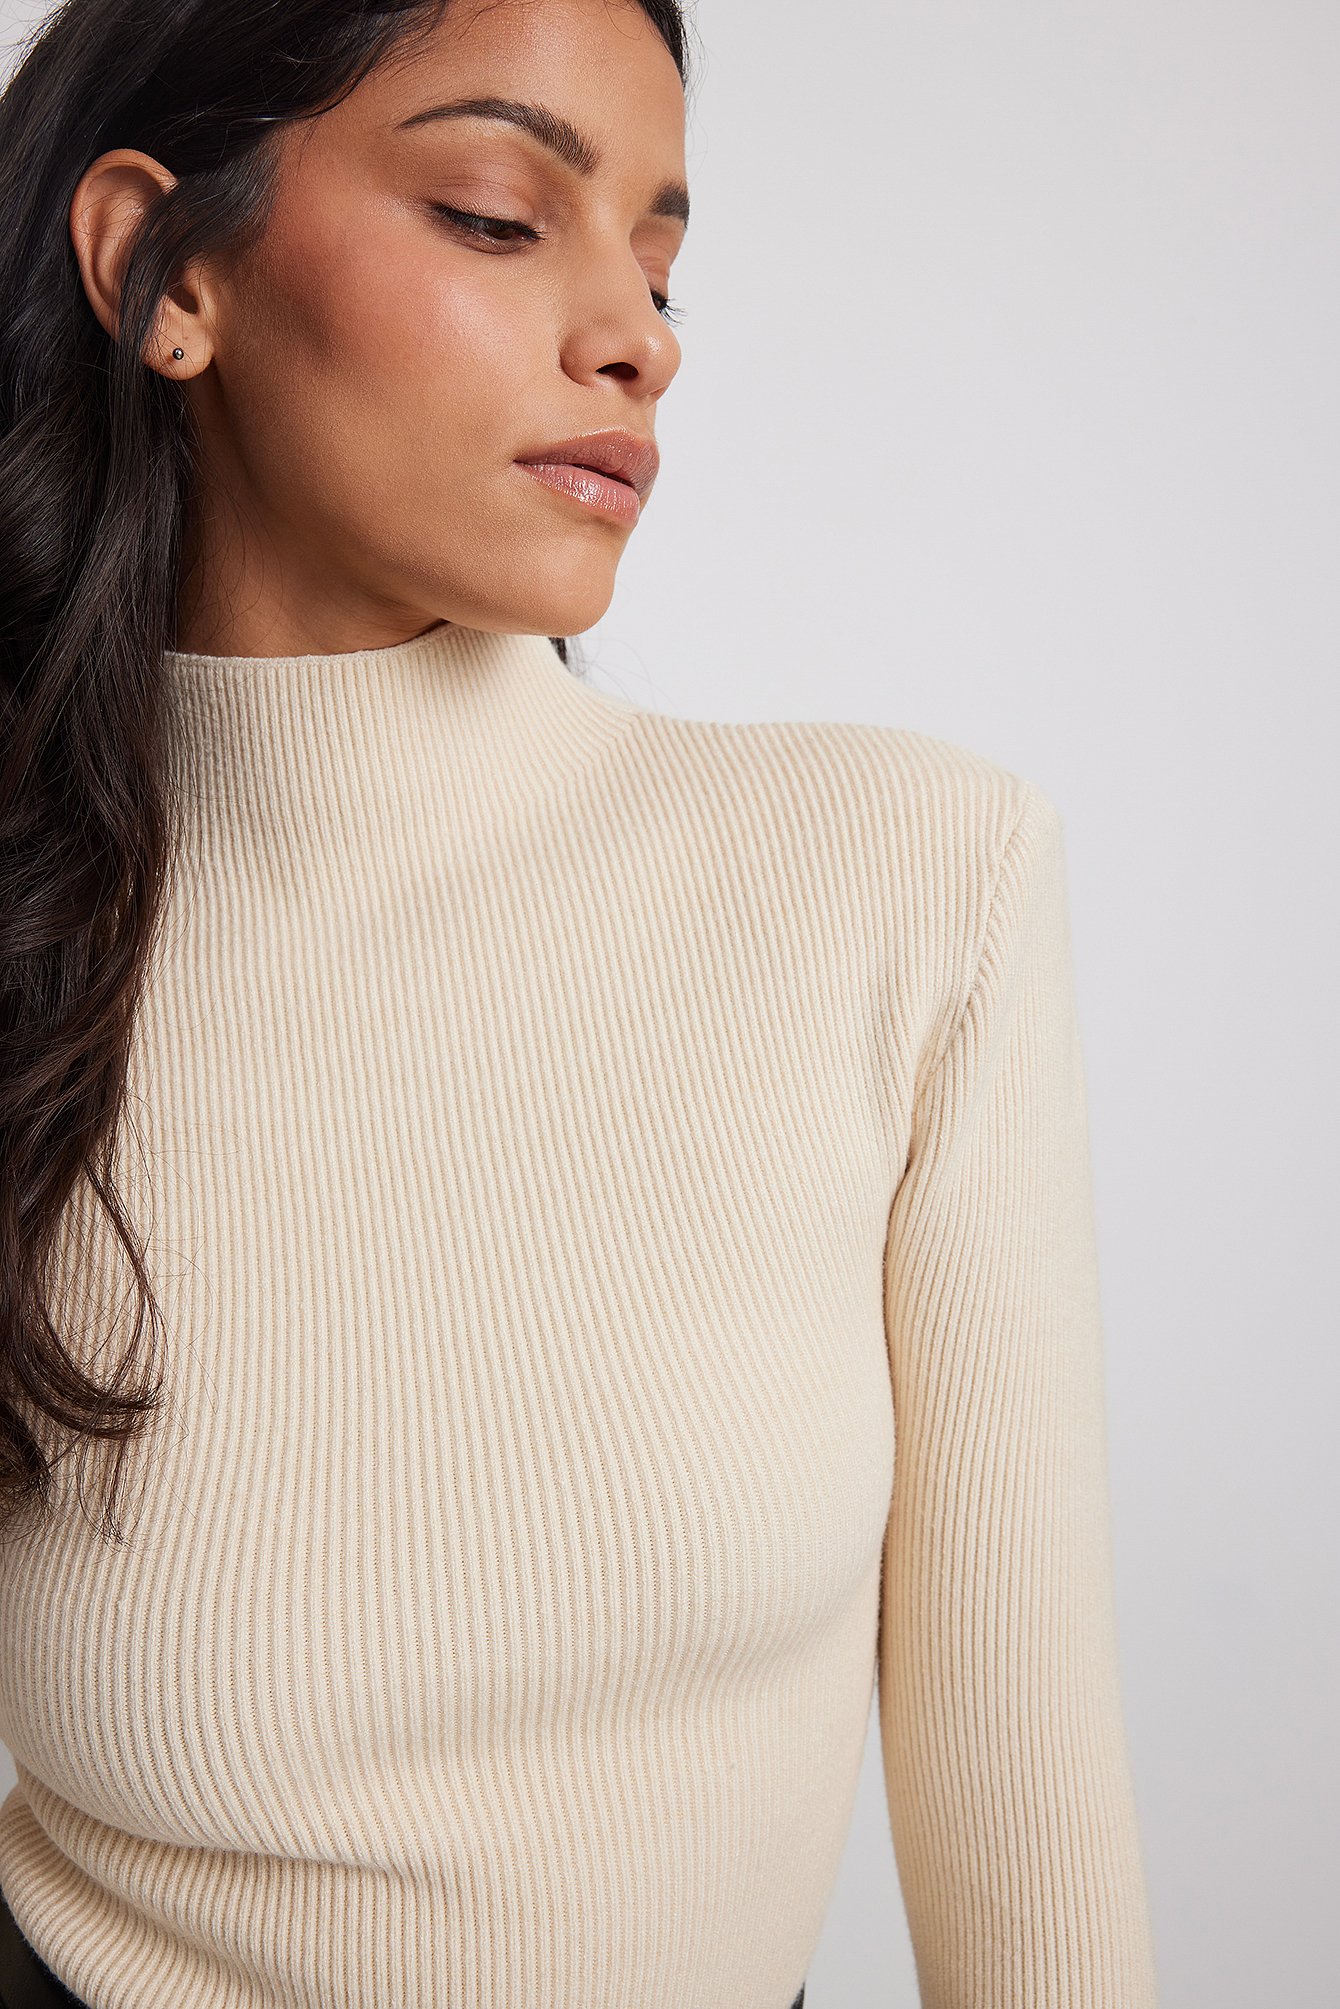 claire rose x na-kd shoulder padded ribbed sweater - offwhite